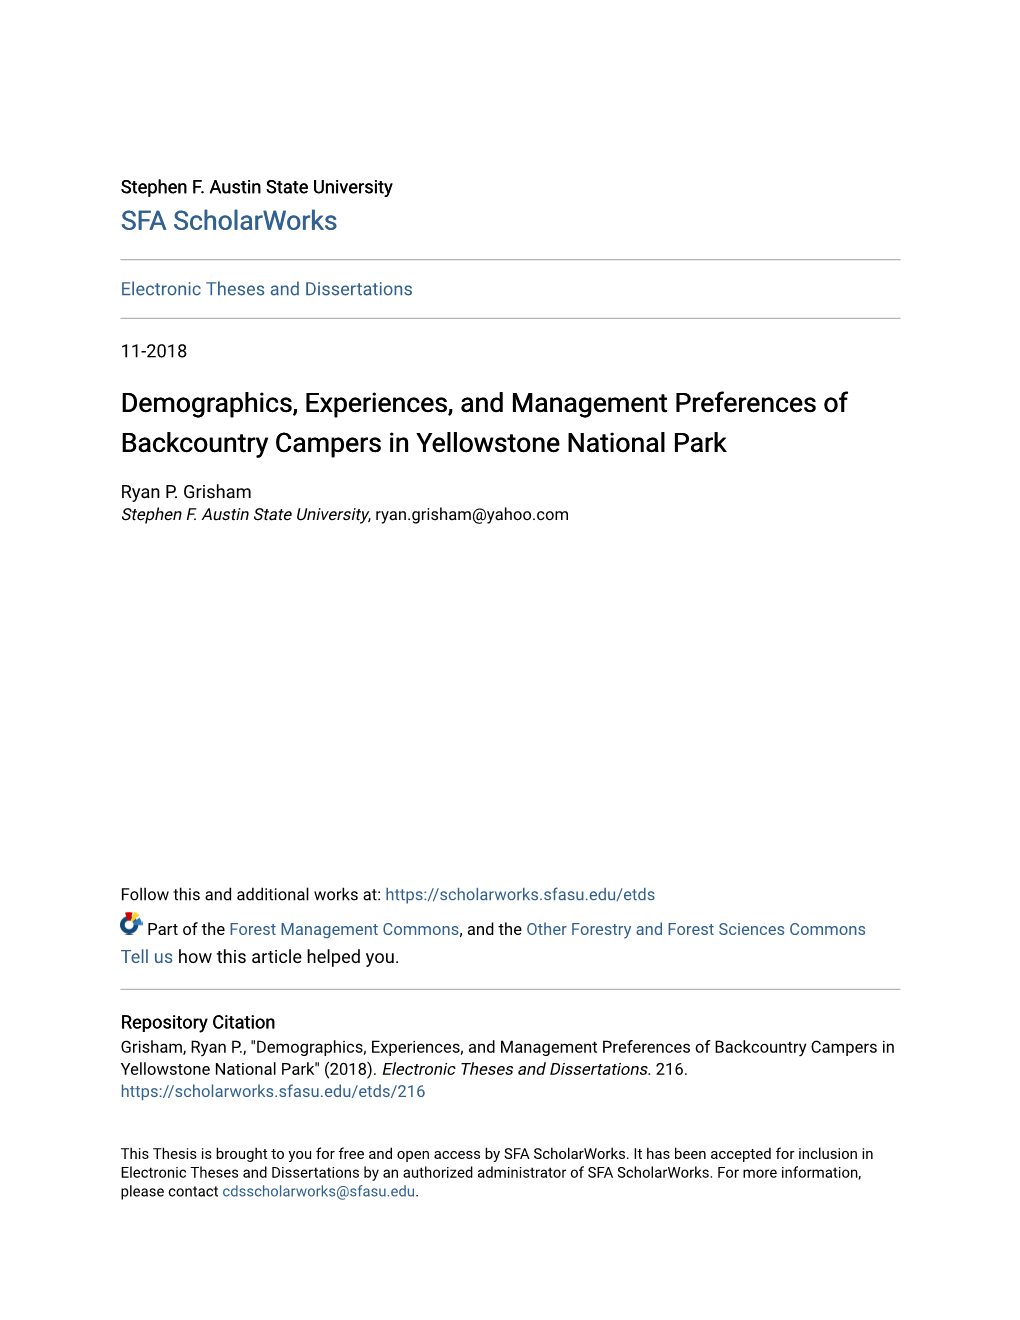 Demographics, Experiences, and Management Preferences of Backcountry Campers in Yellowstone National Park